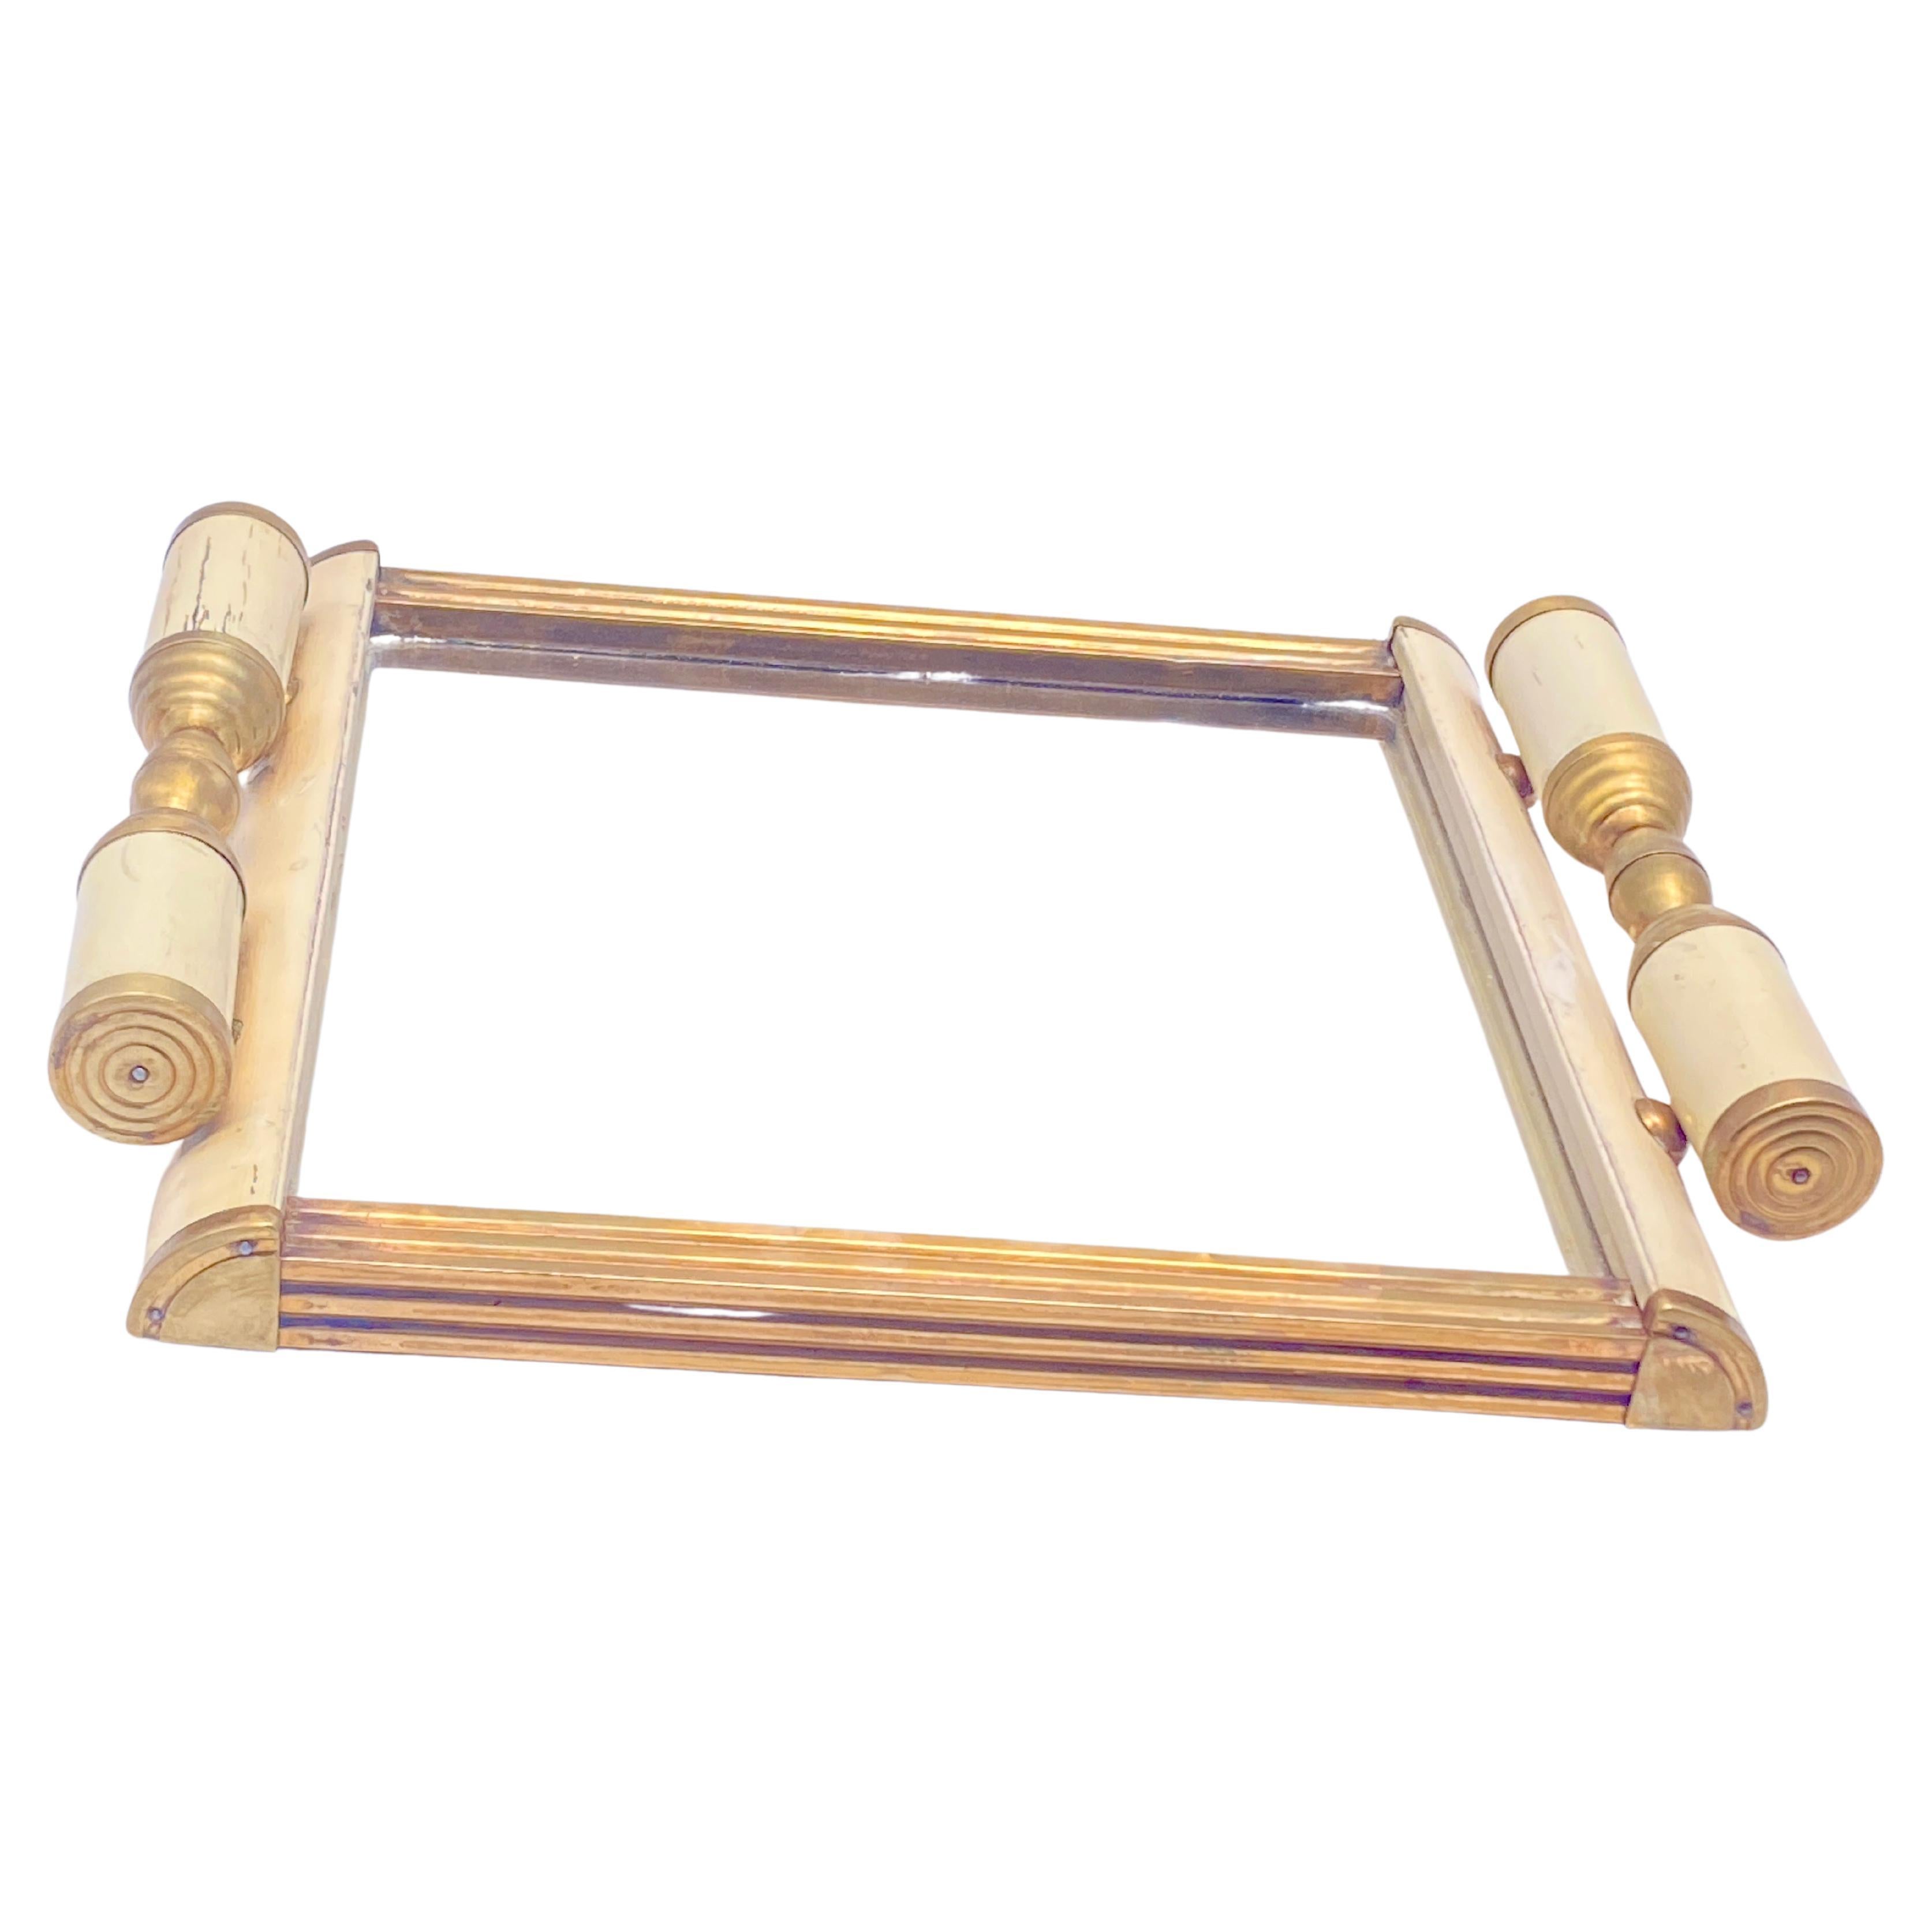 Art Deco Platter, Tray, Brass, and  White Wood, Handles and Mirror, France 1930 For Sale